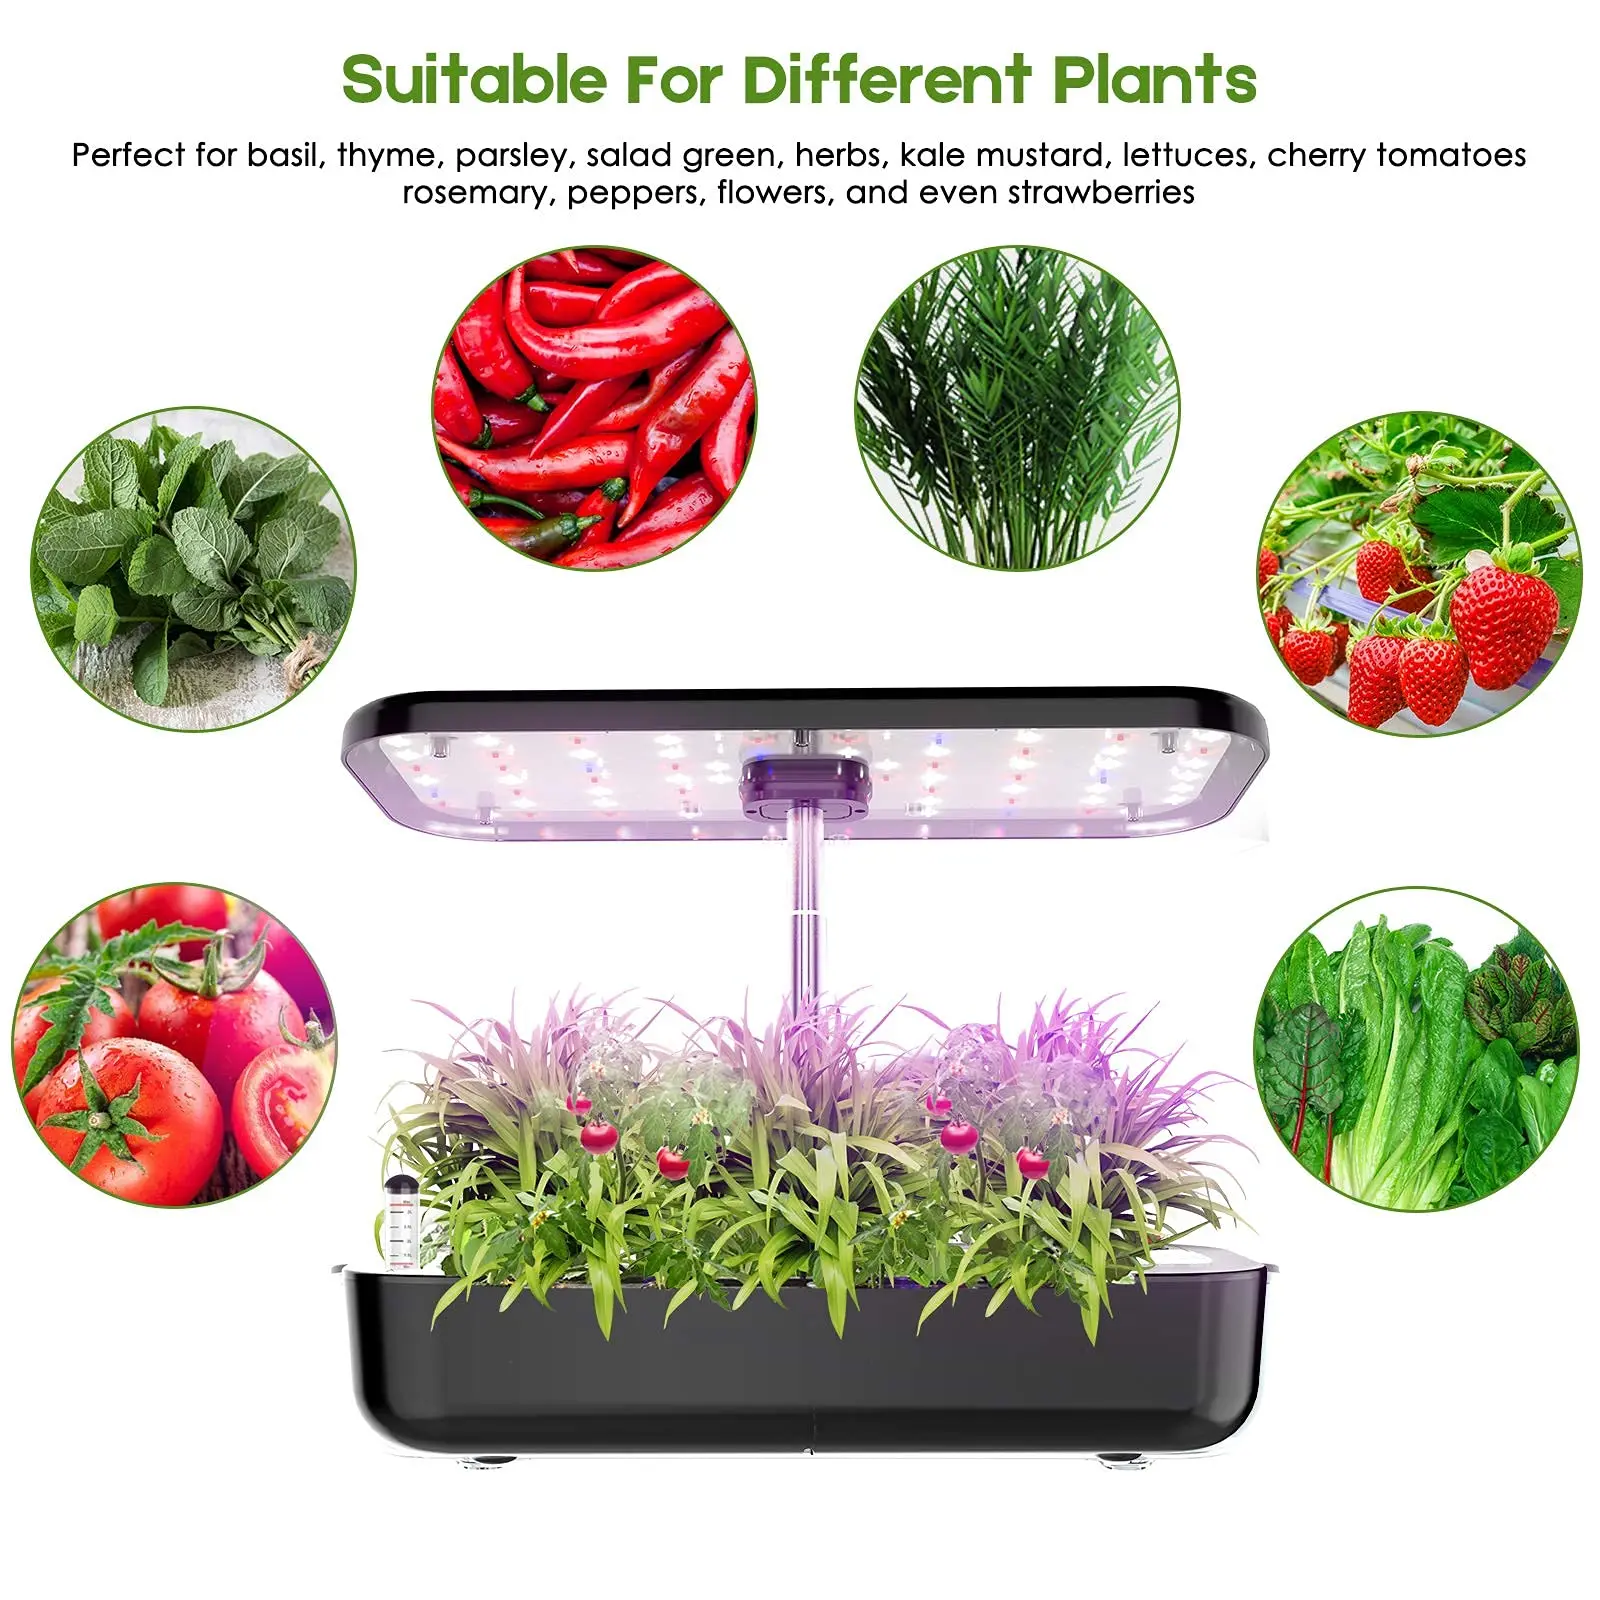 The Revolutionary Hydroponic Growing System idoo